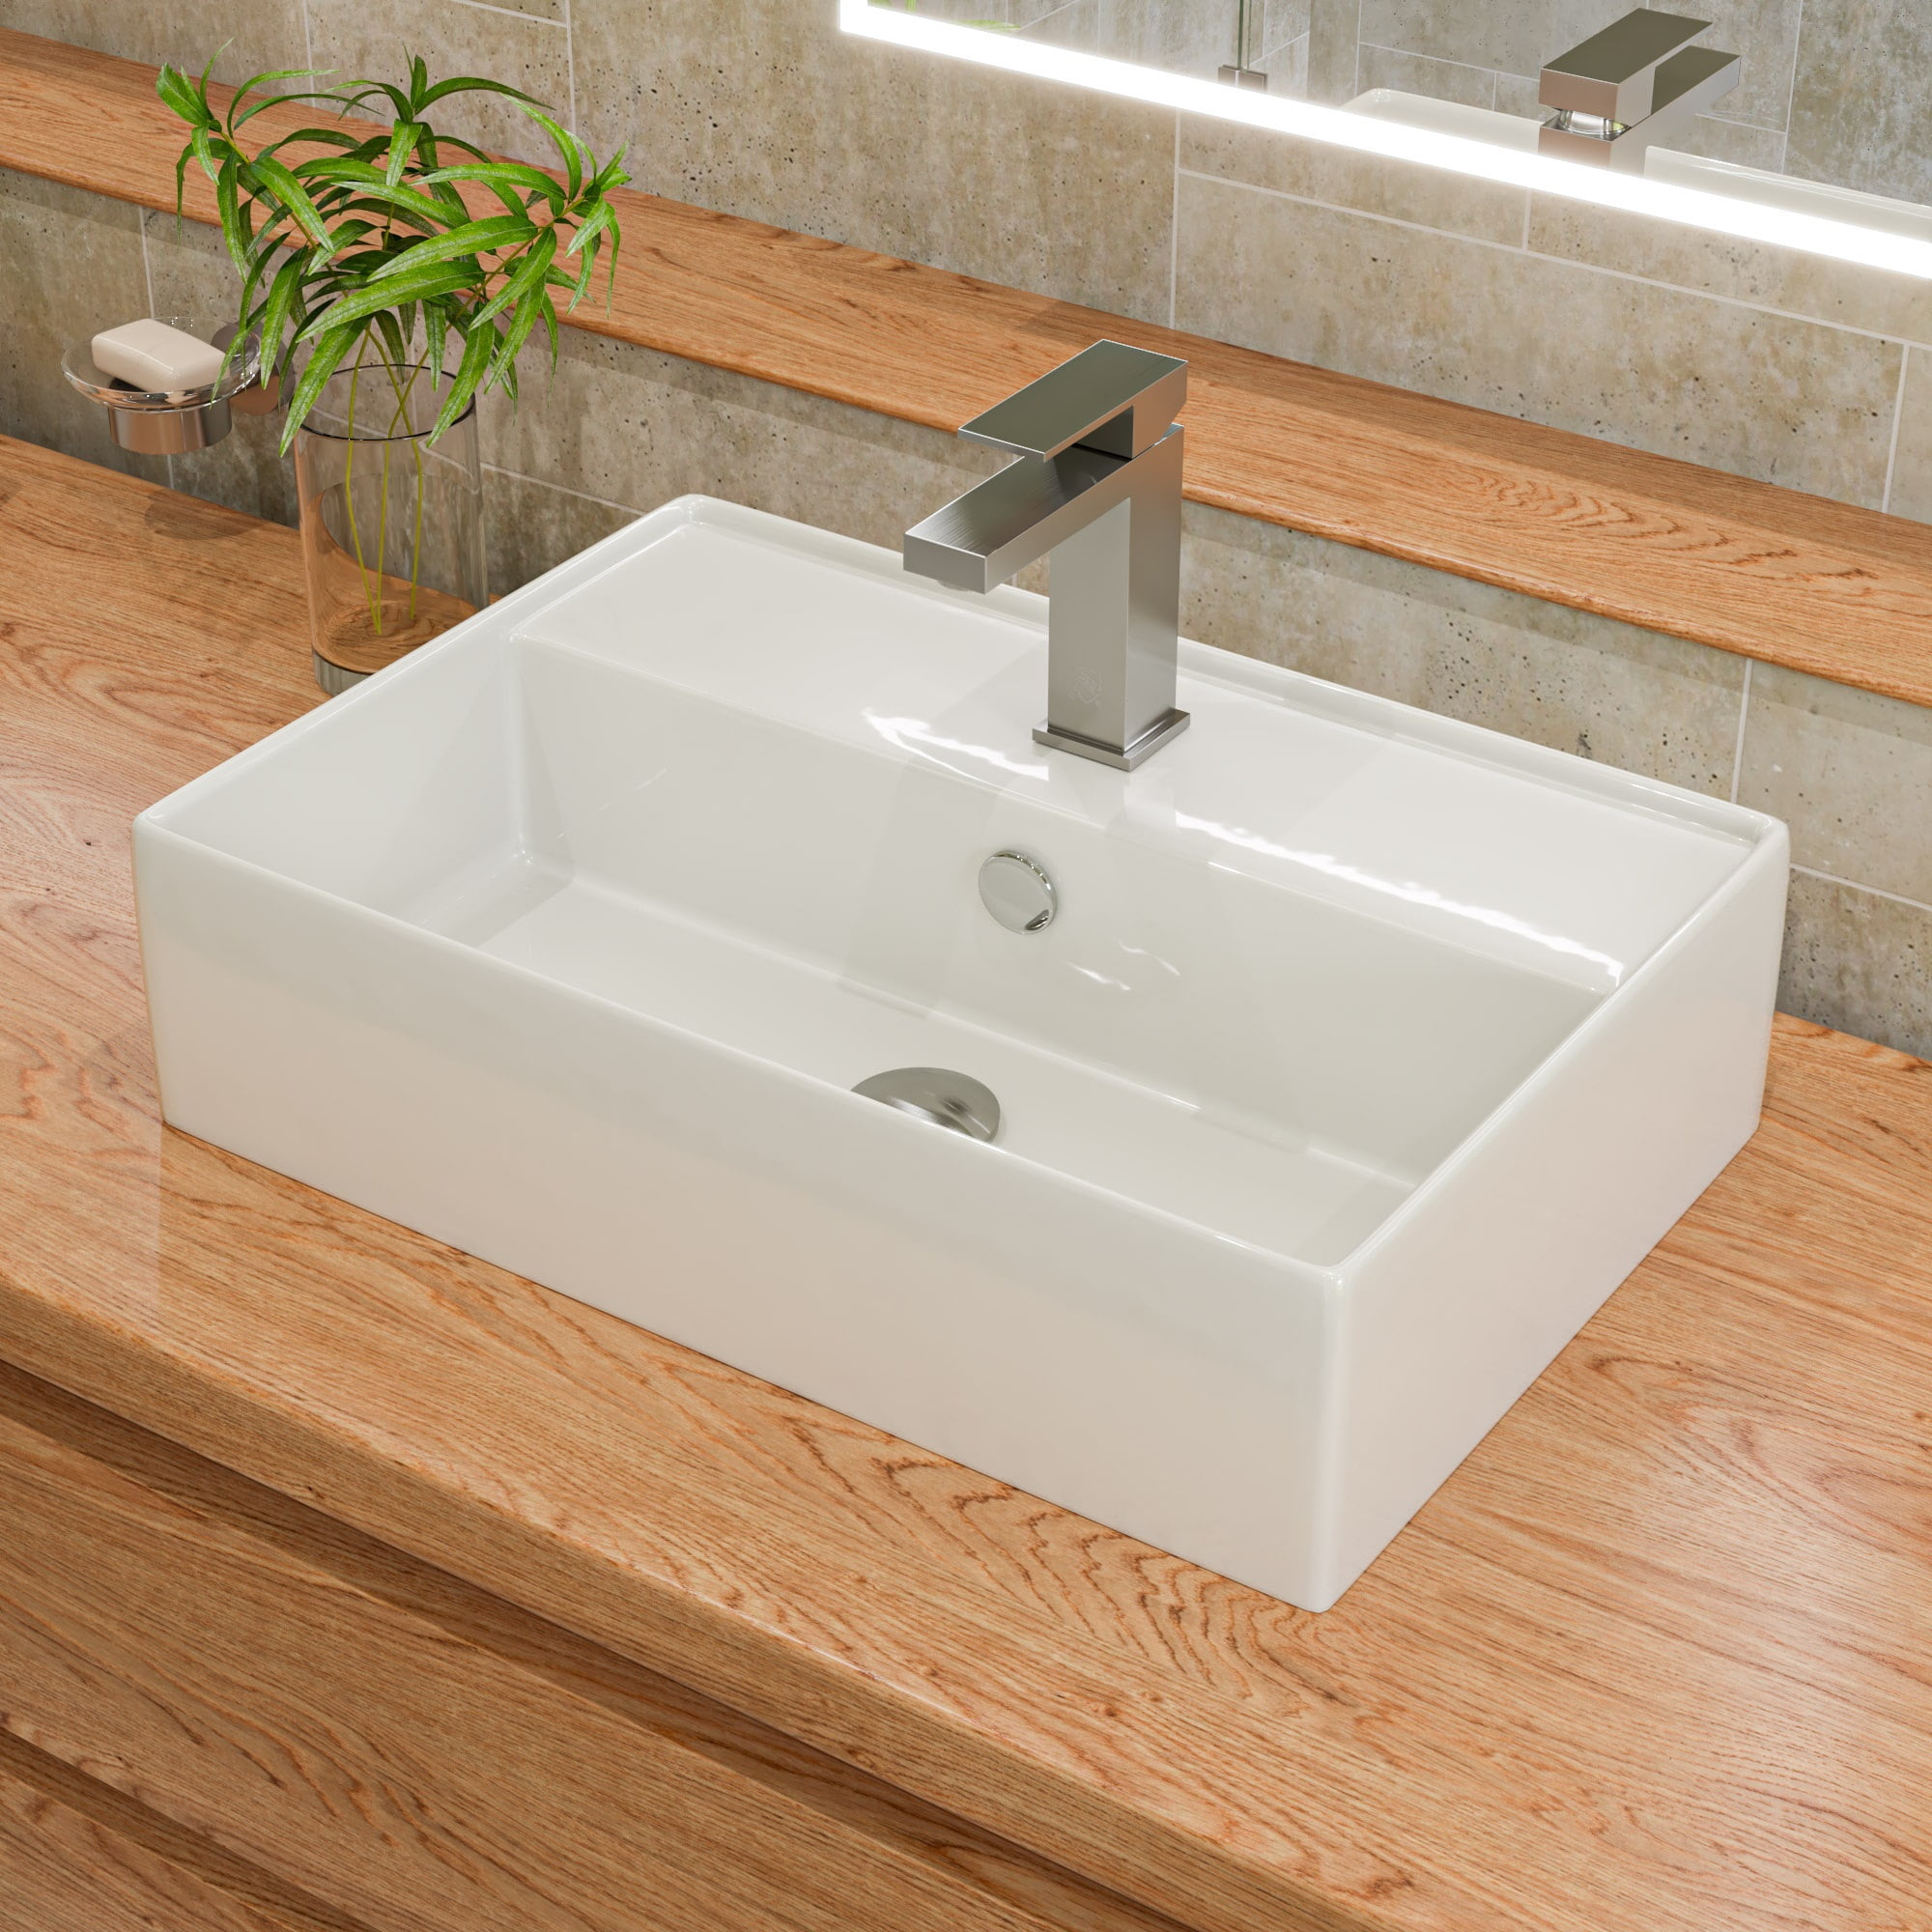 Picture of ALFI Brand ABC901-W 24 in. Modern Rectangular Above Mount Ceramic Sink with Faucet Hole, White